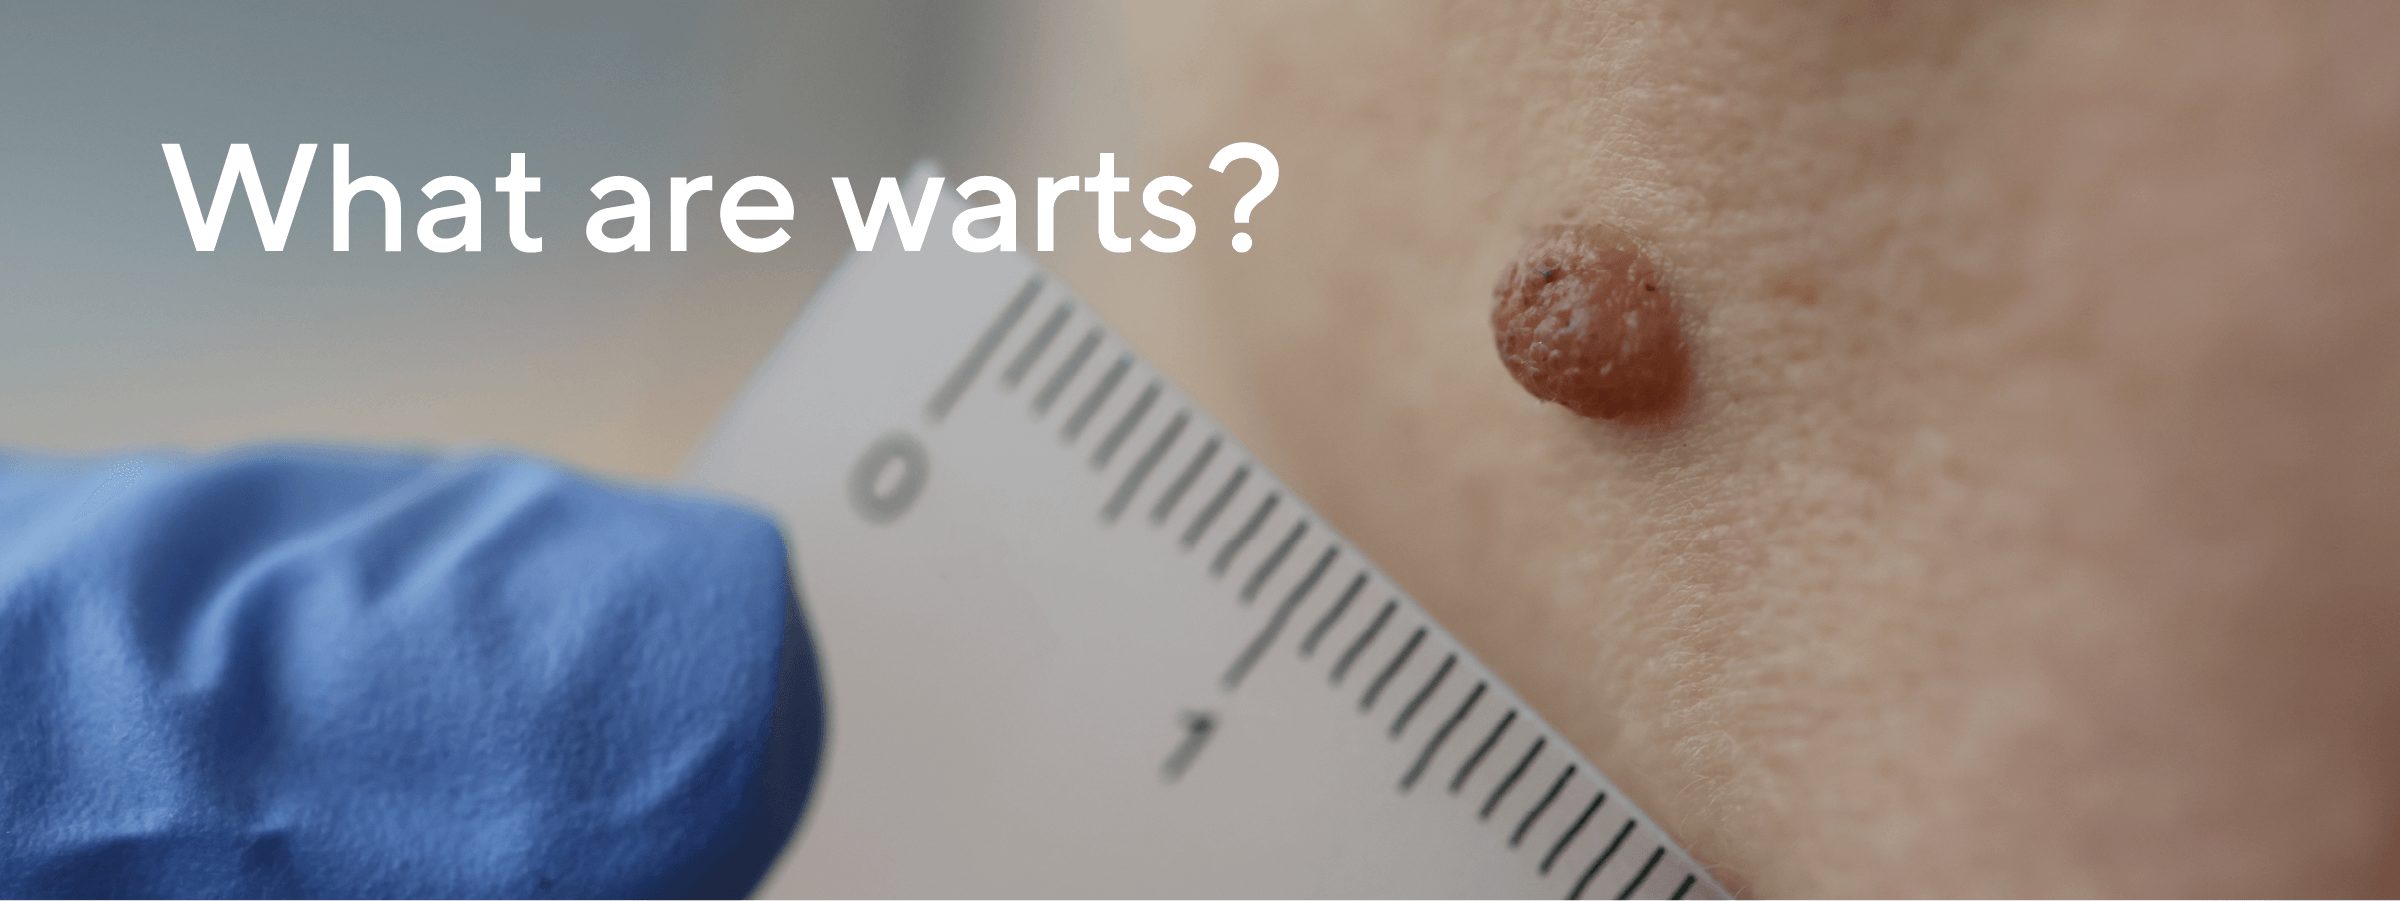 What are warts?